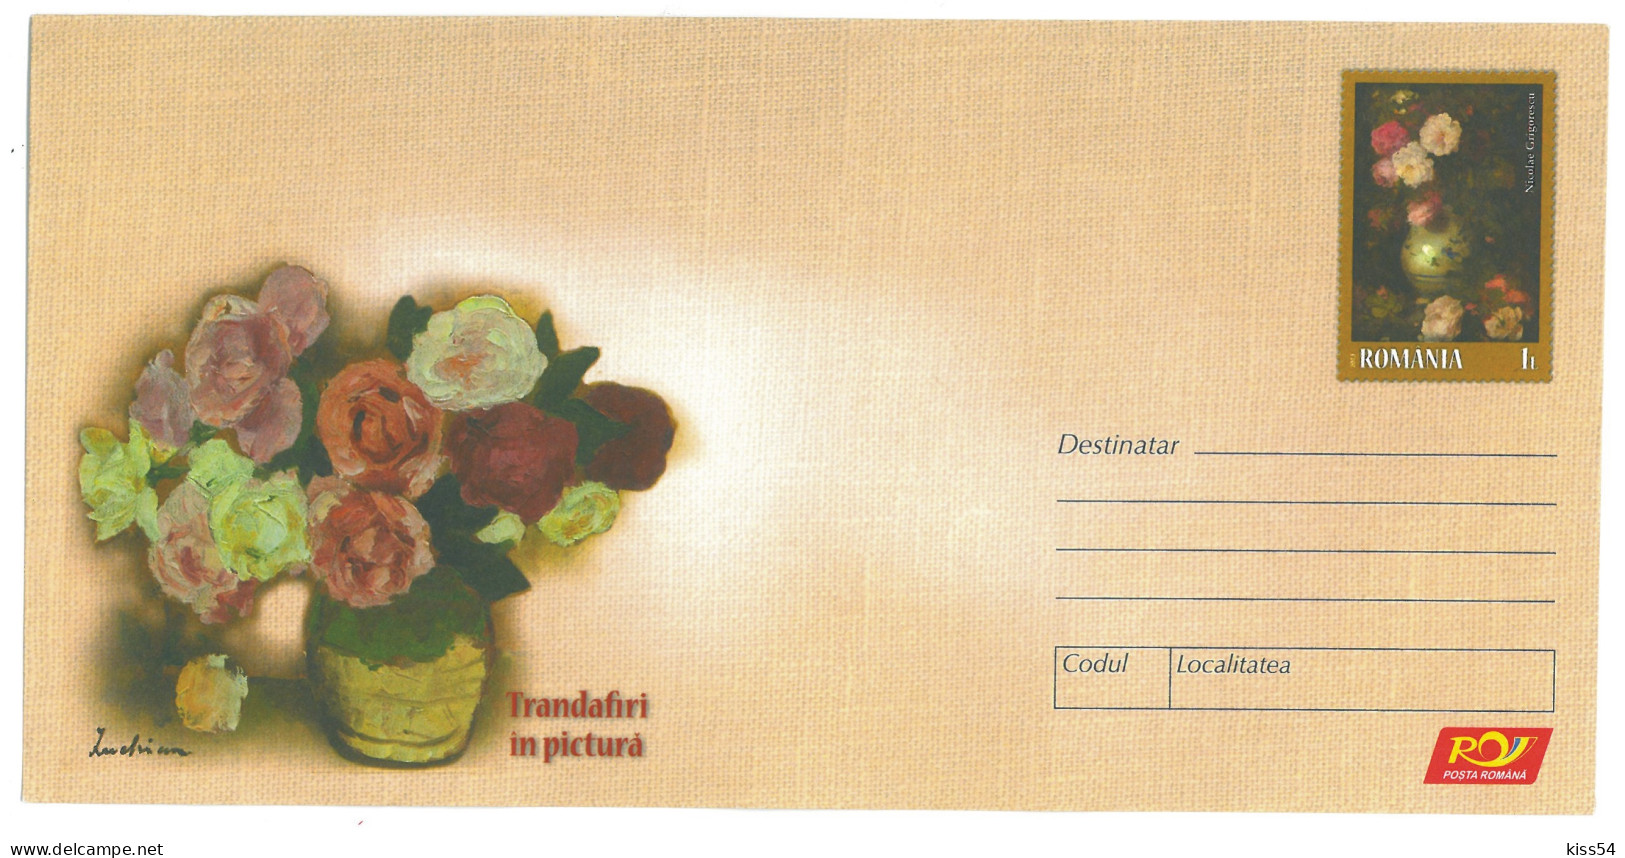 IP 2013 - 10 Paintings With Roses Painted By Grigorescu And Luchian, Romania - Stationery - Unused - 2013 - Postal Stationery